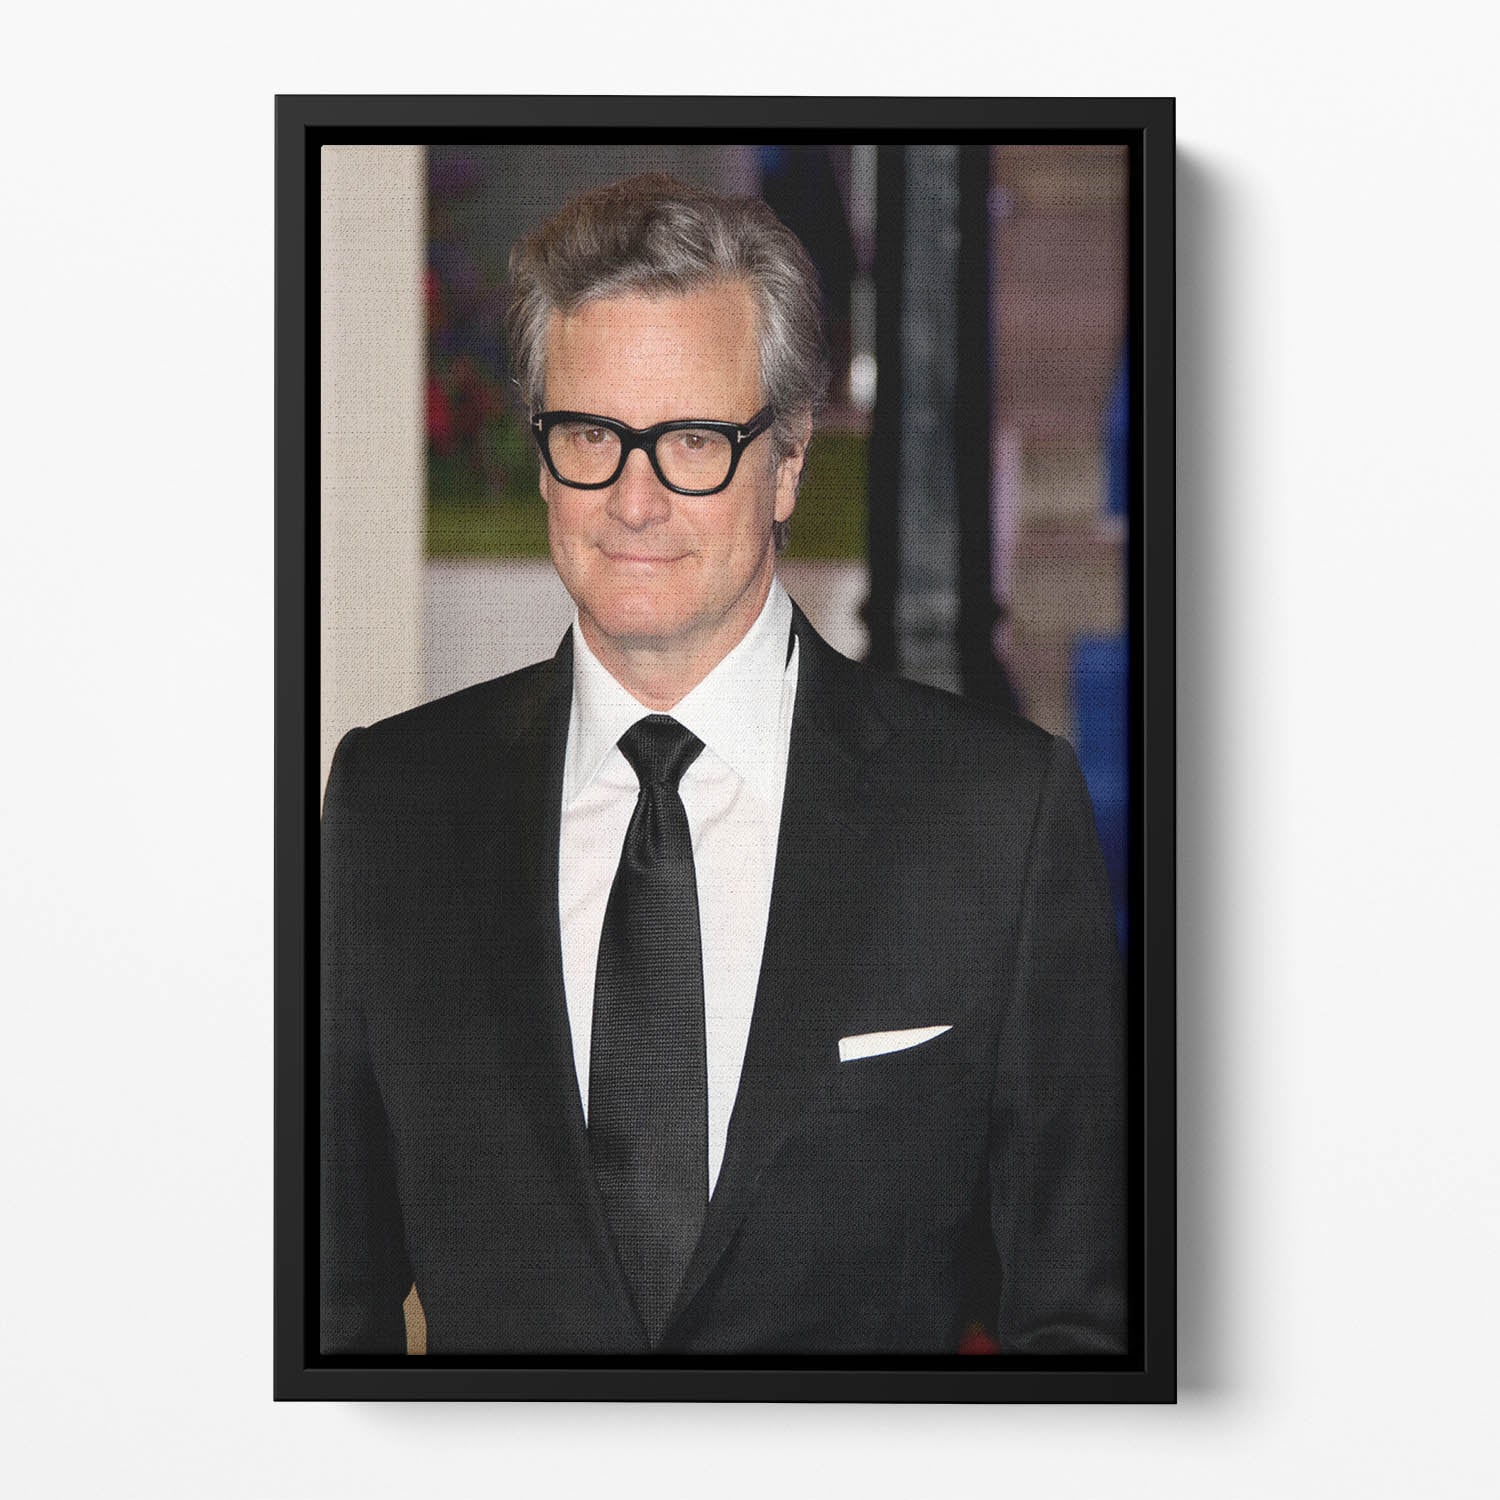 Colin Firth at a premiere Floating Framed Canvas